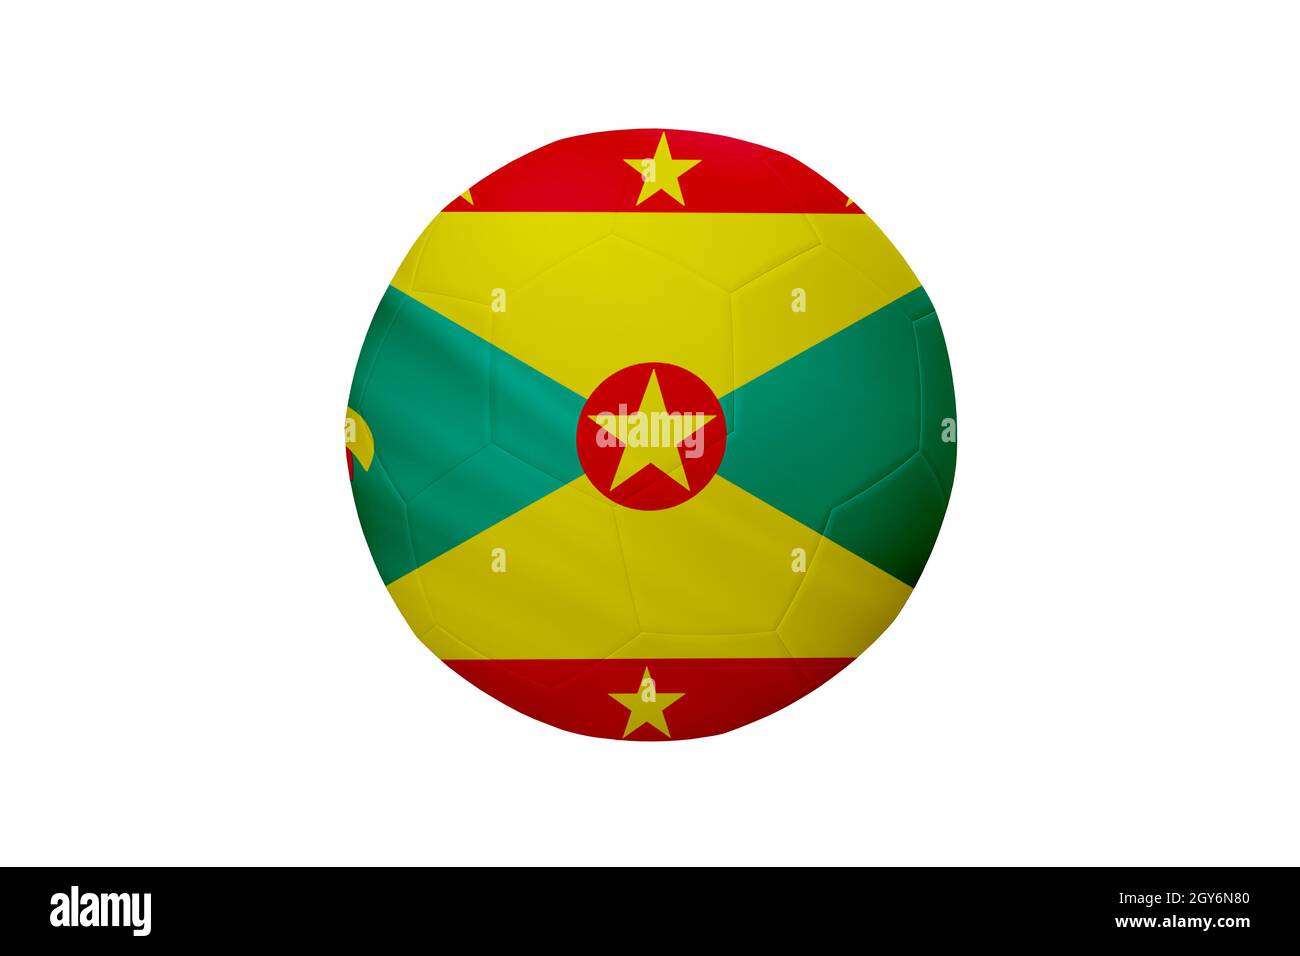 Football in the colors of the Grenada flag isolated on white background. In a conceptual championship image supporting Grenada. Stock Photo